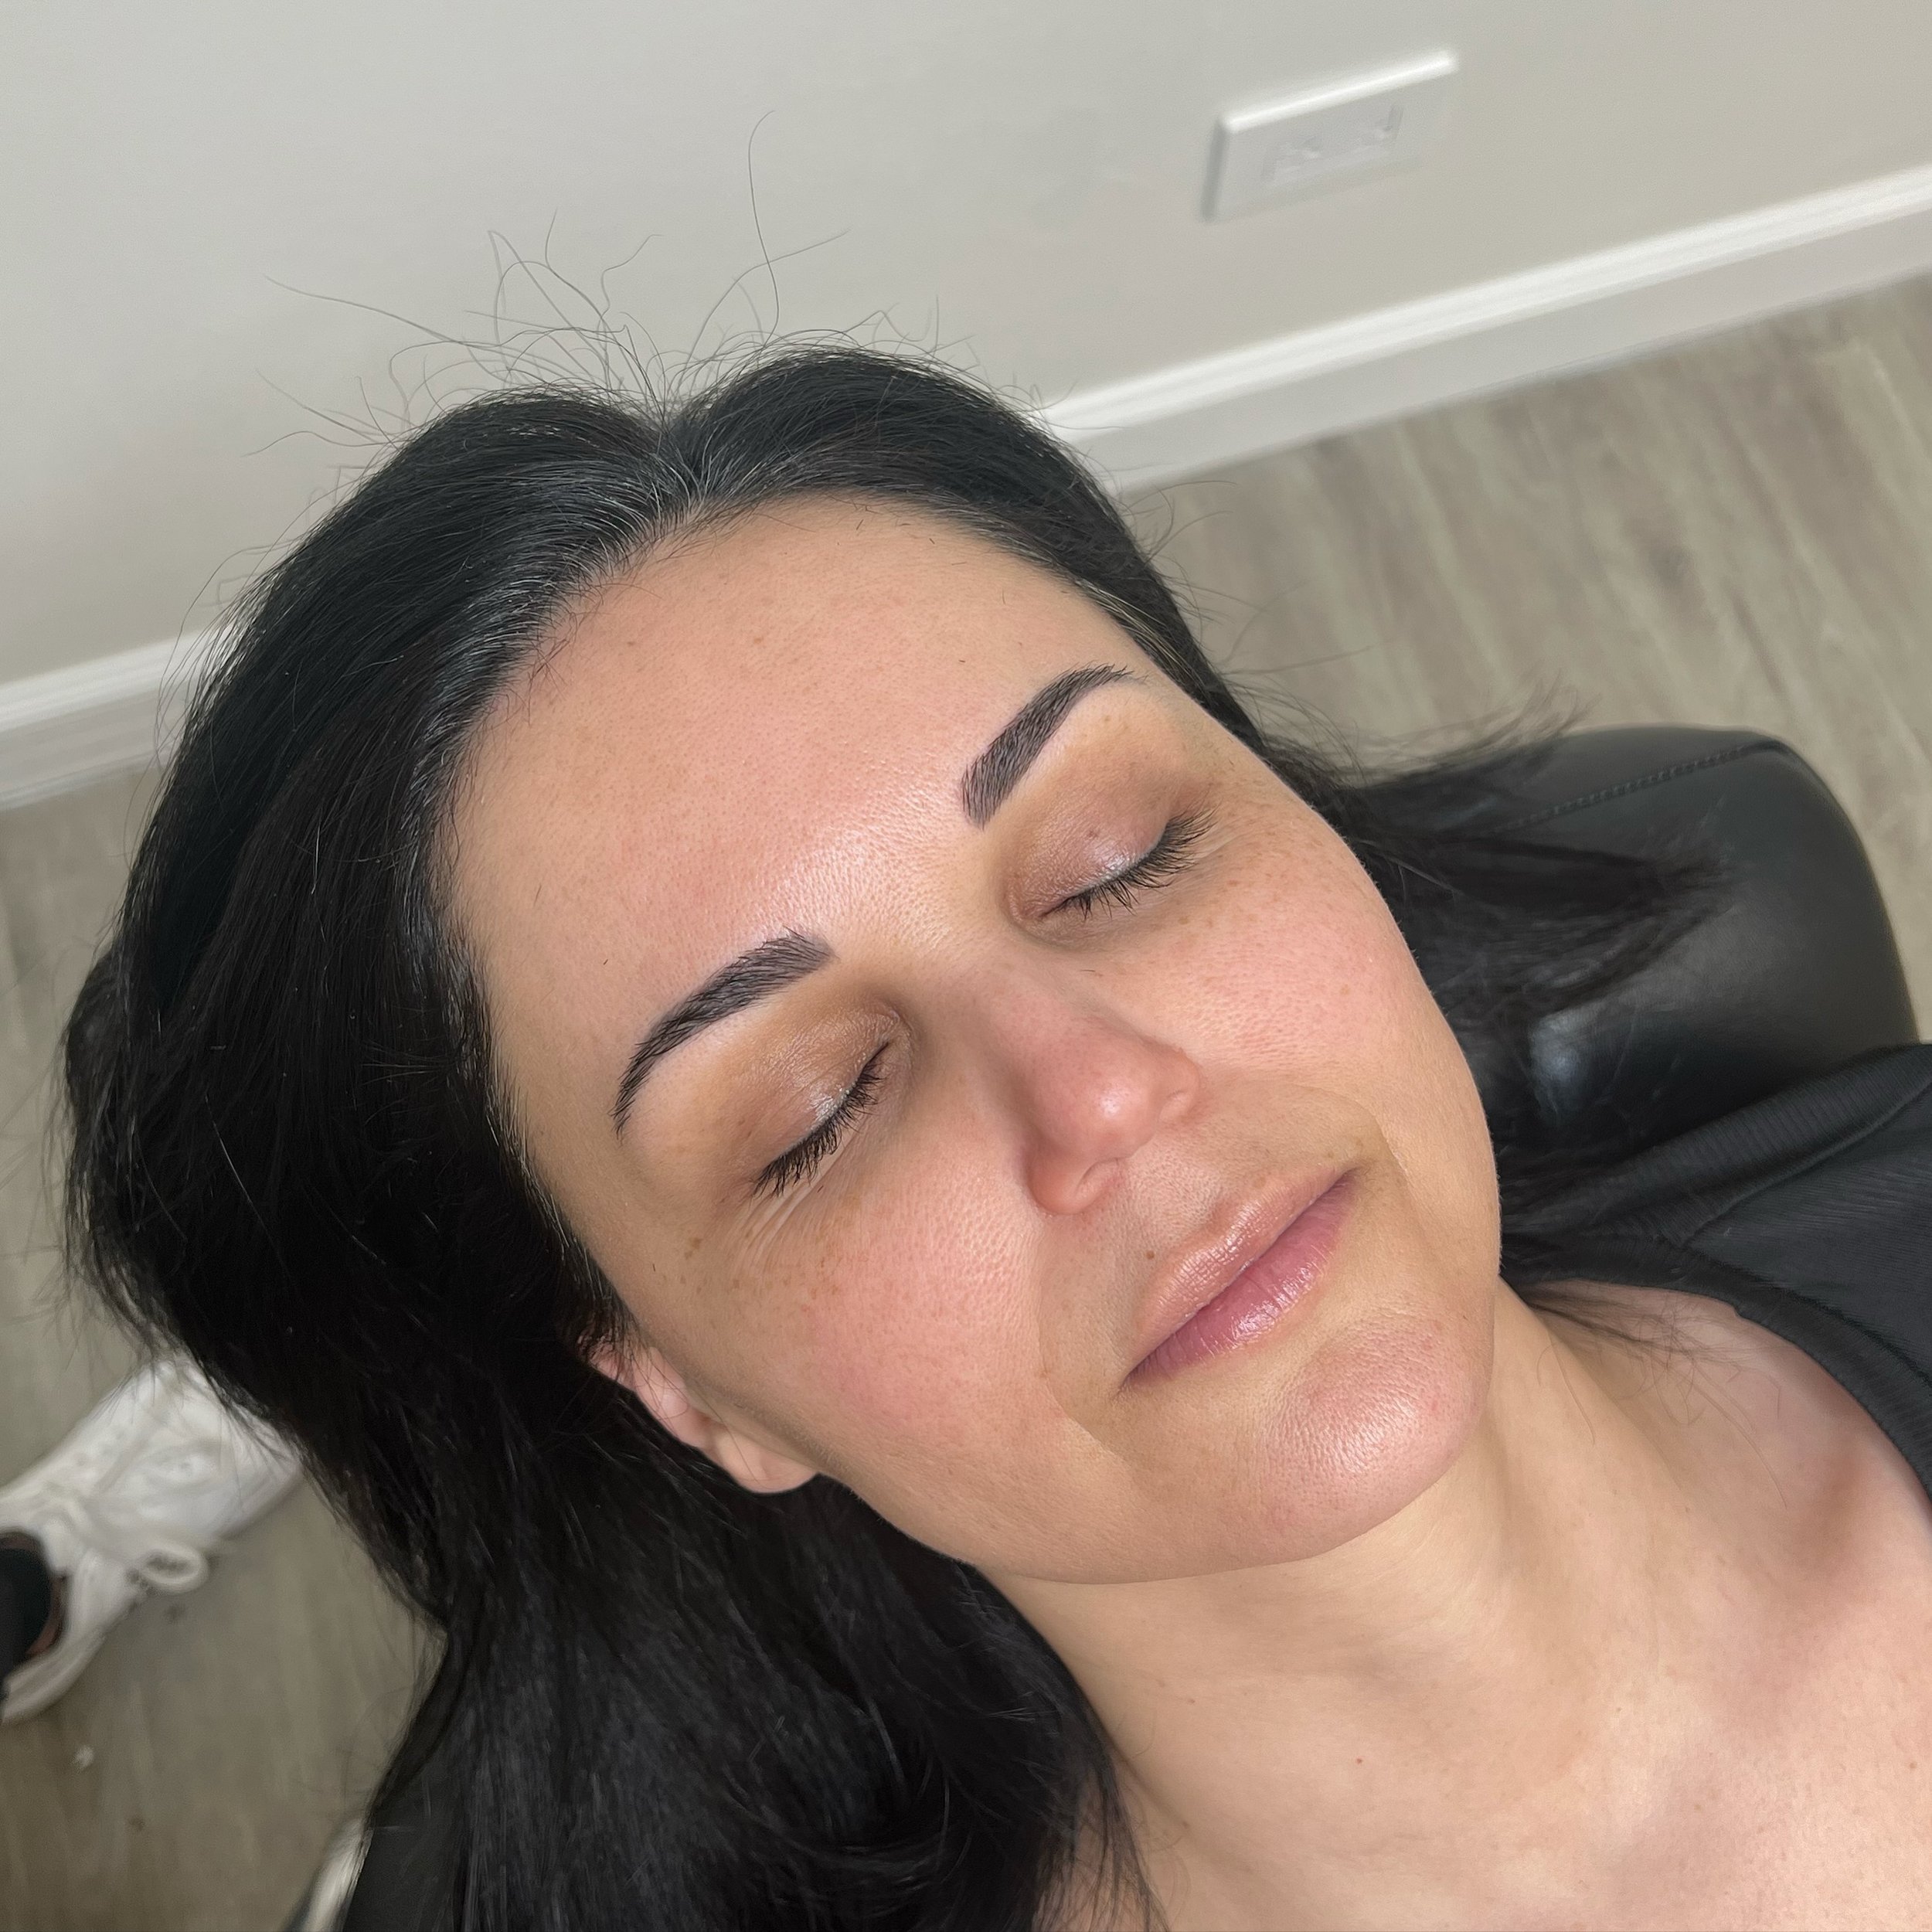 Beautifully healed powder brows - NO FILTER! Wale up with waterproof brows this summer! 🤤🙌🏽 #powderbrows #brows #browshaping #browartist #pmu #ombrepowderbrows